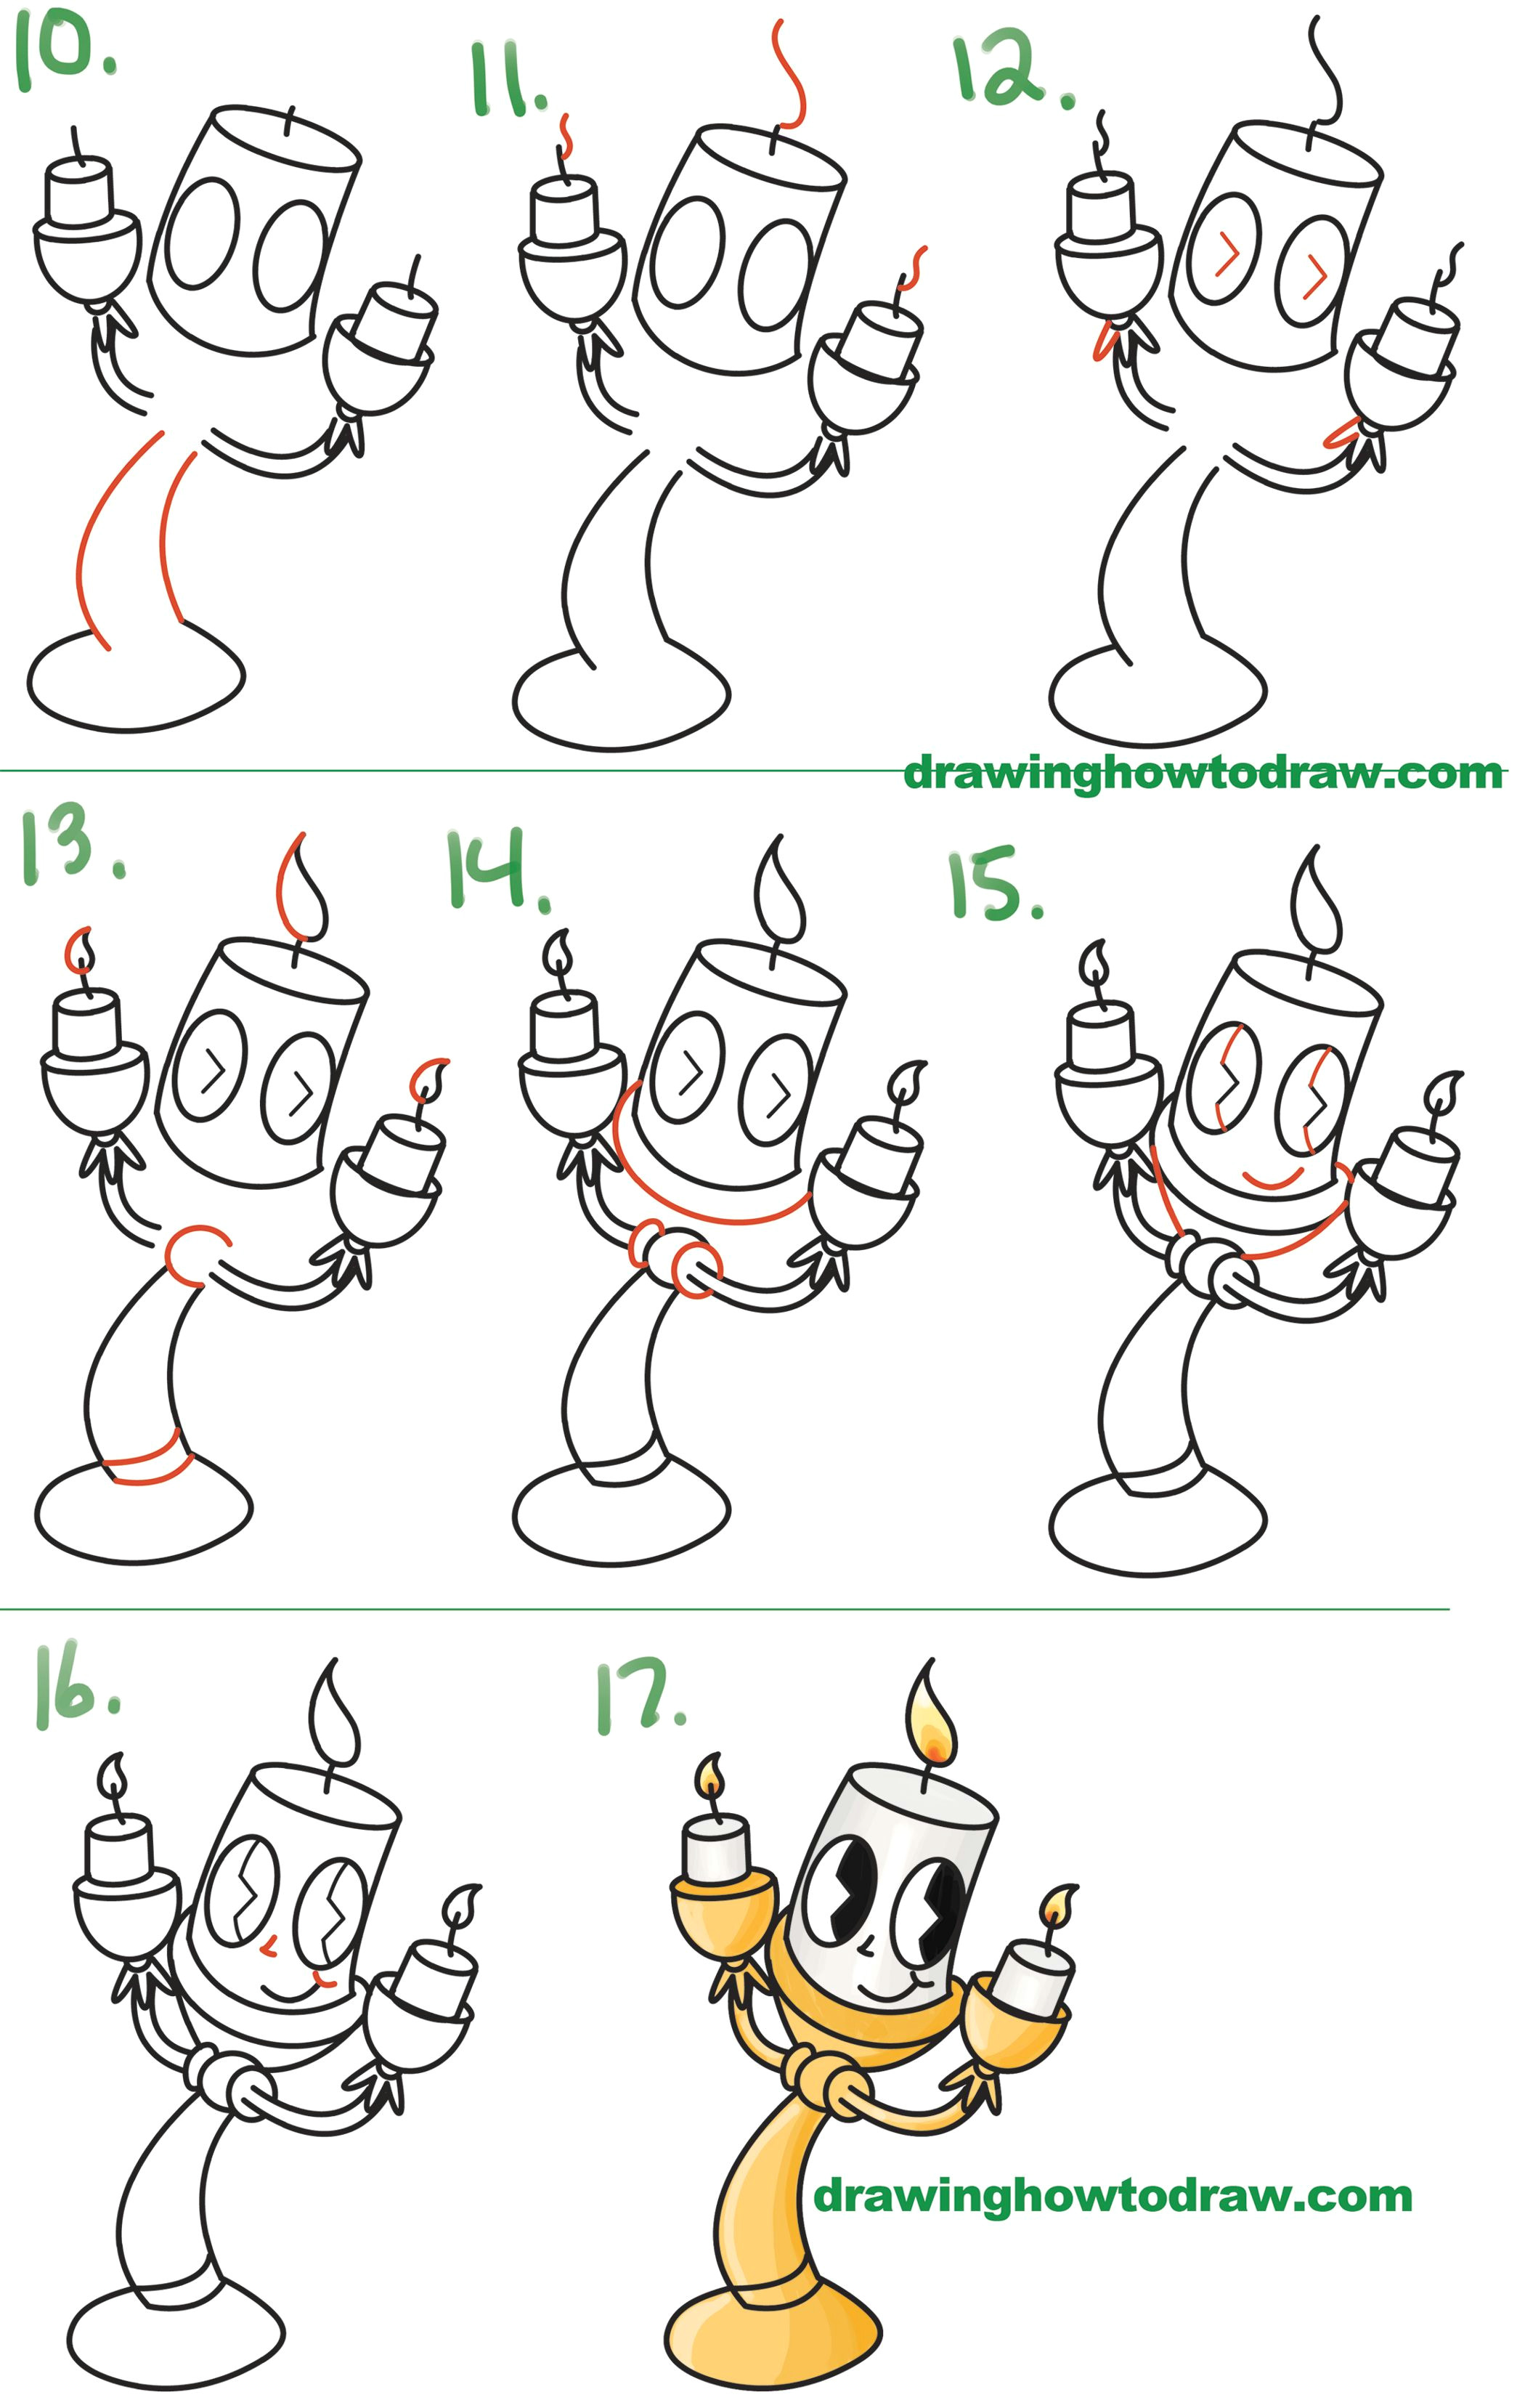 learn how to draw lumiere cute kawaii chibi from beauty and the beast simple steps drawing lesson for children and beginners